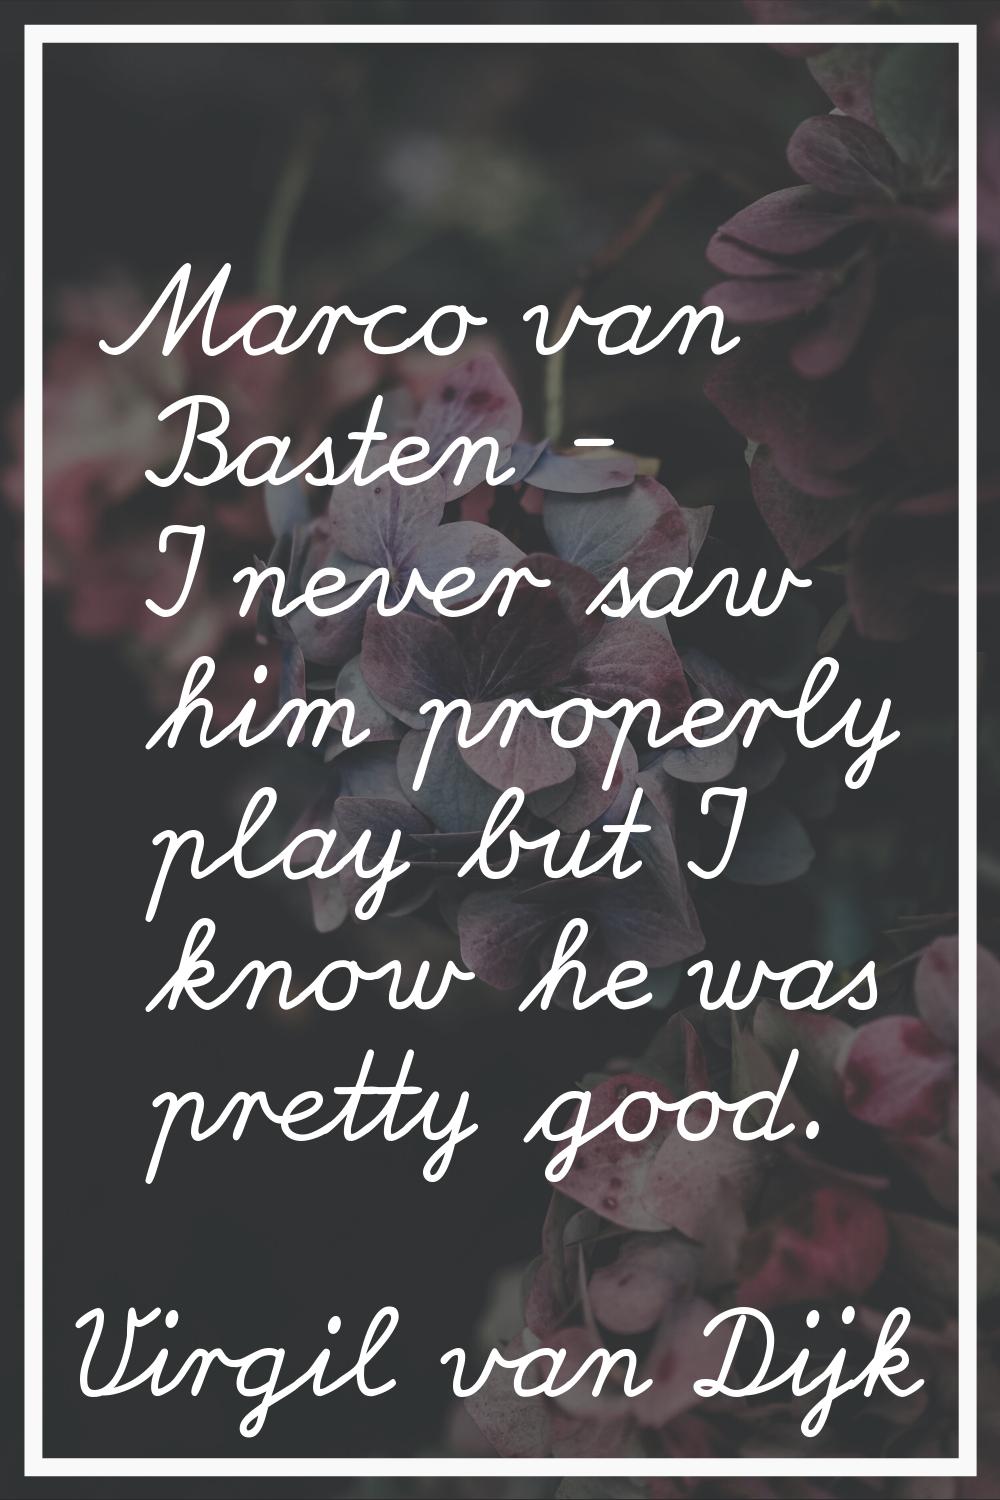 Marco van Basten - I never saw him properly play but I know he was pretty good.